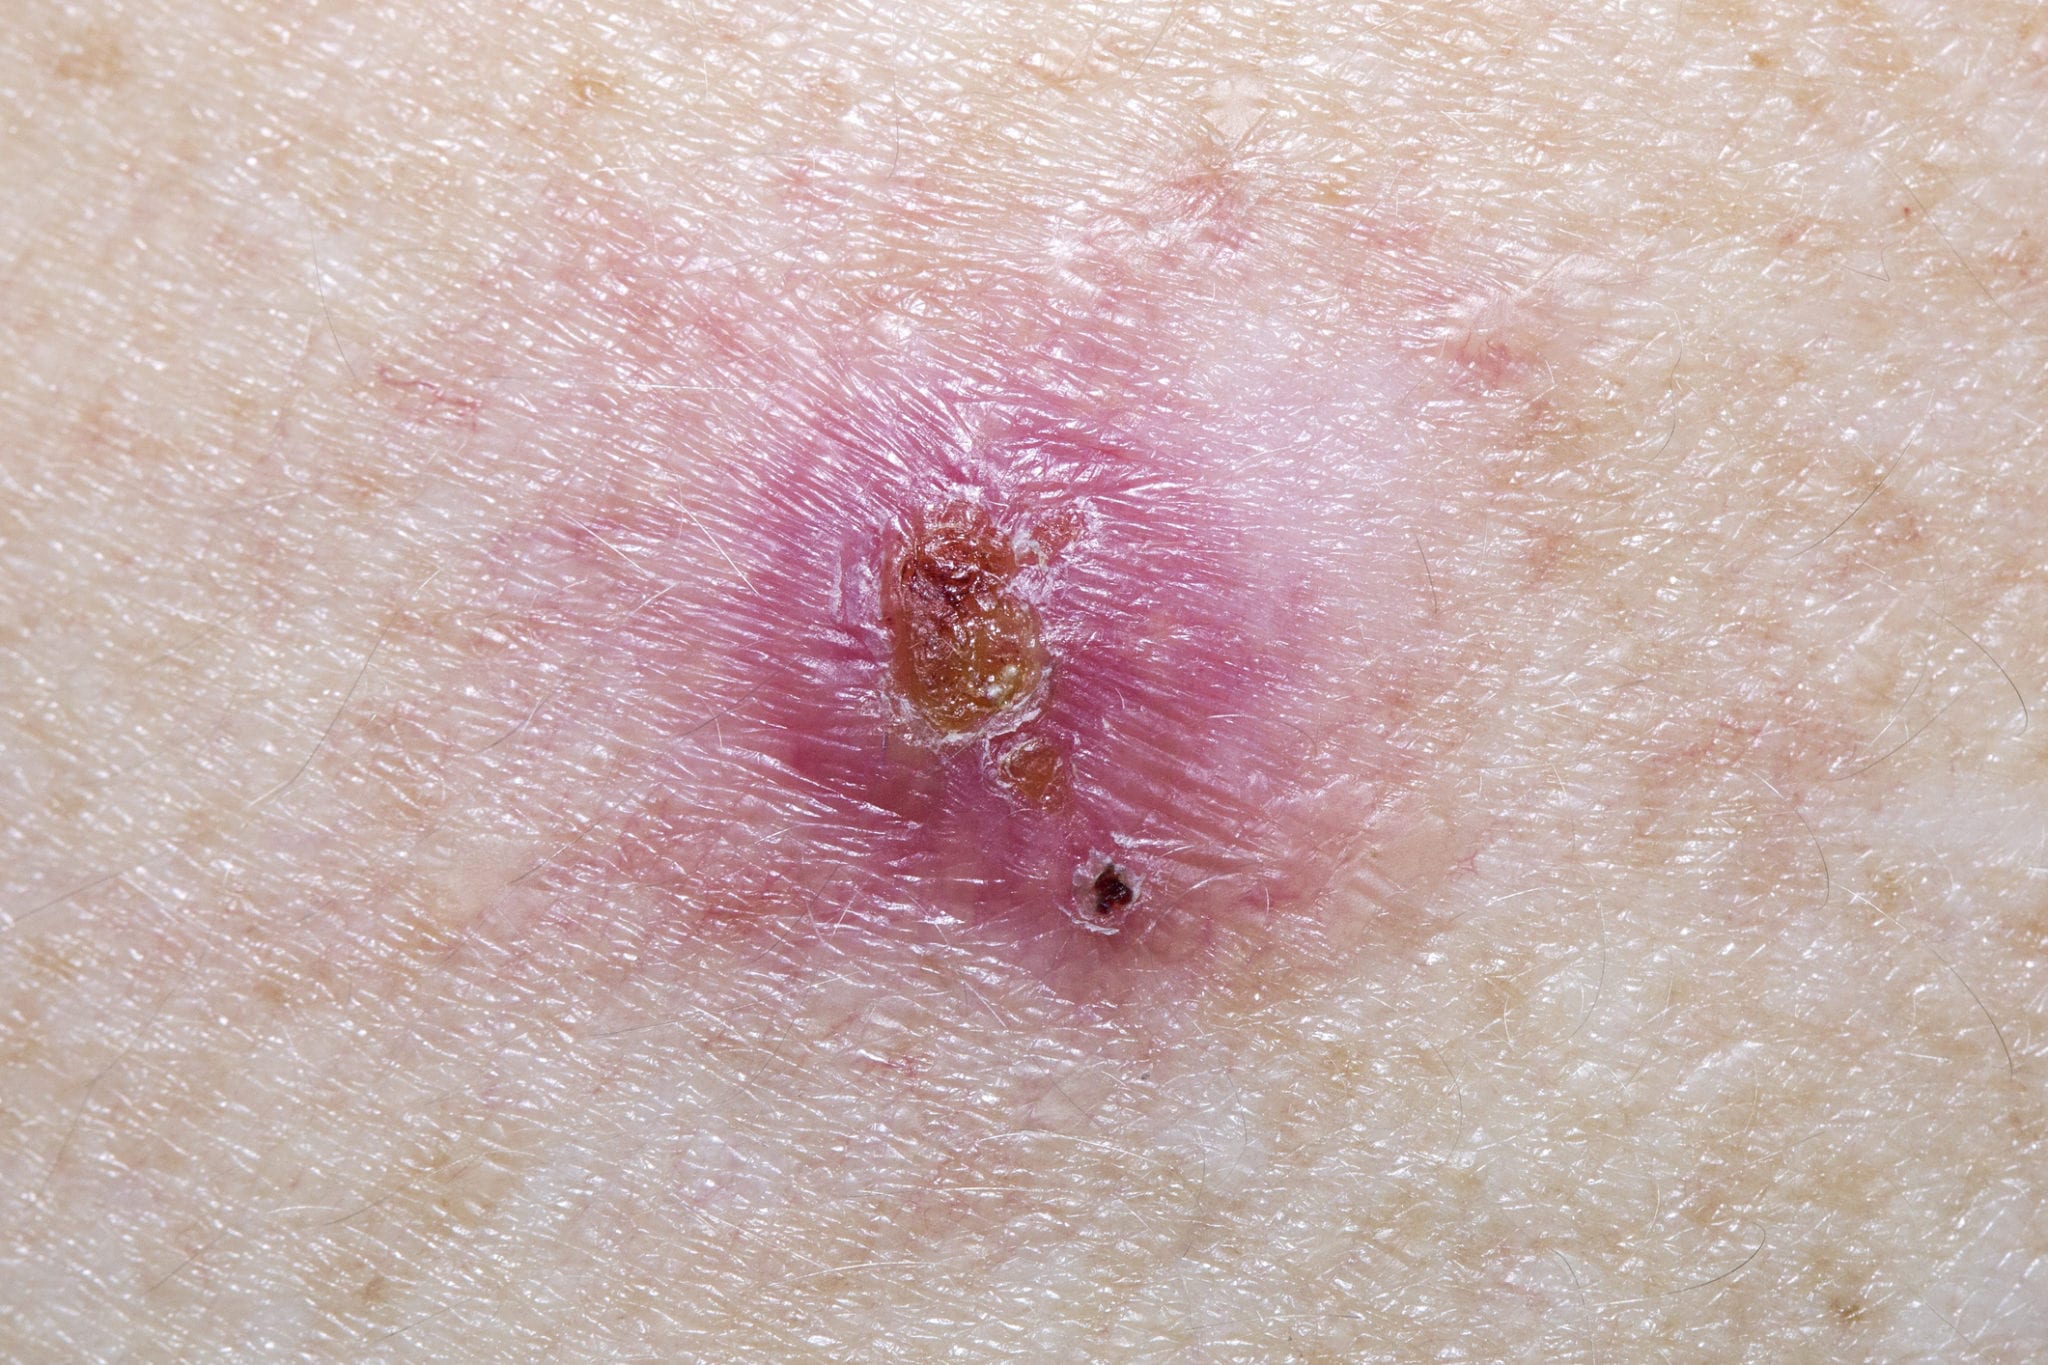 Basal Cell Carcinoma - pre-removal of a suspicious dark brown mole on the abdomen of a young woman.